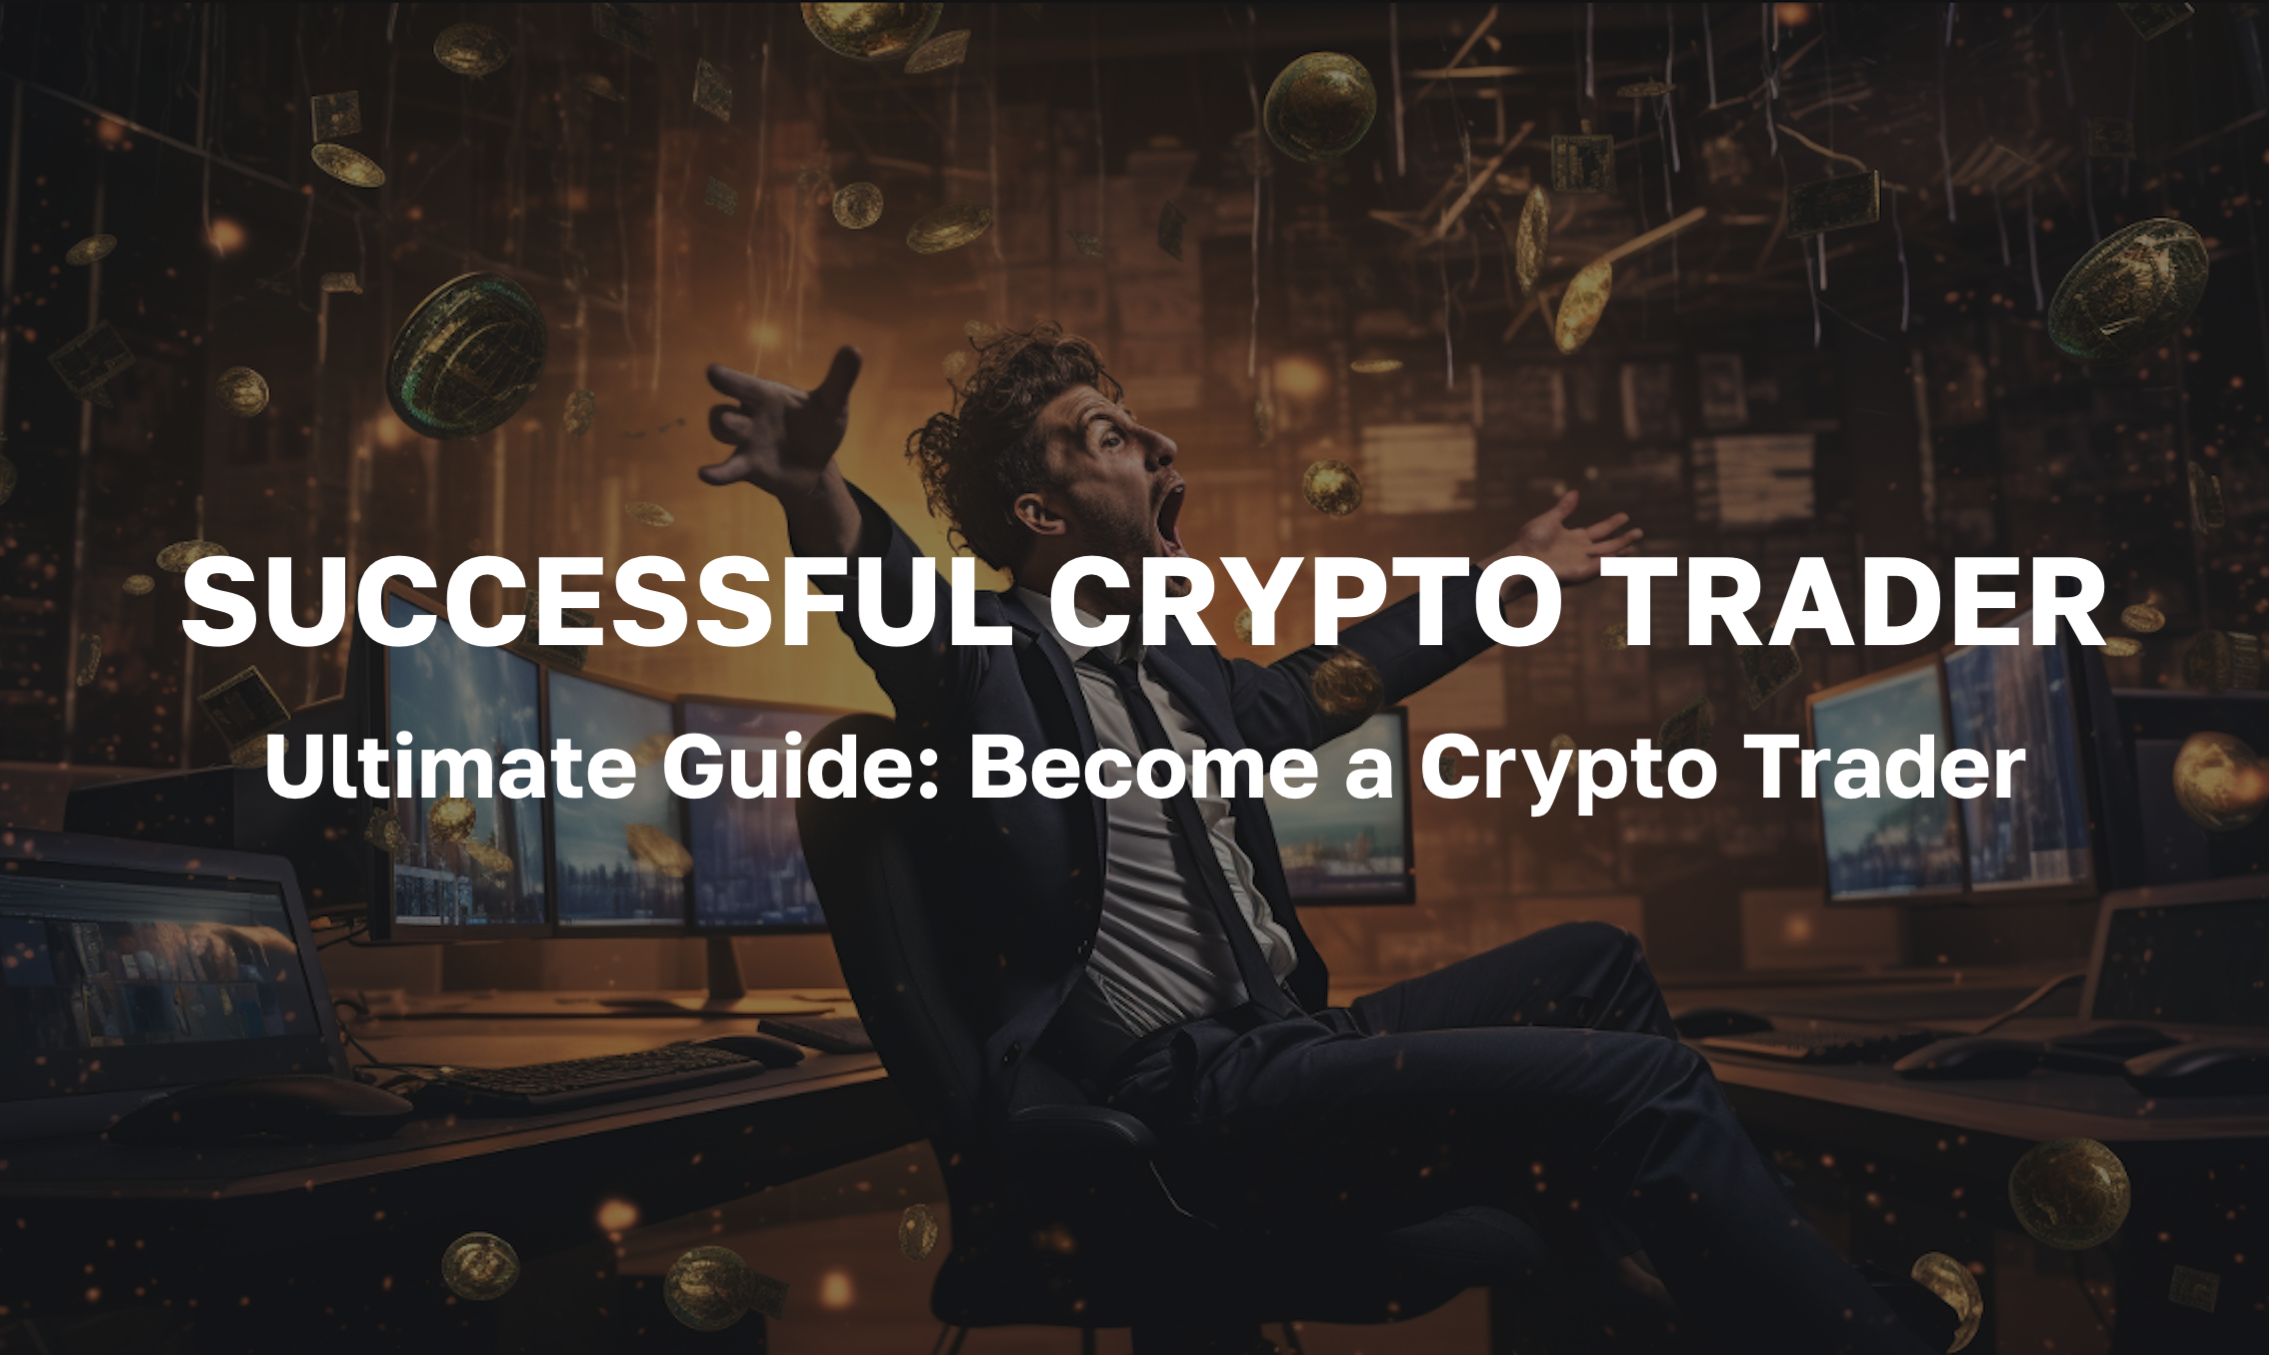 5 Things to Know to Become a Successful Crypto-Trader